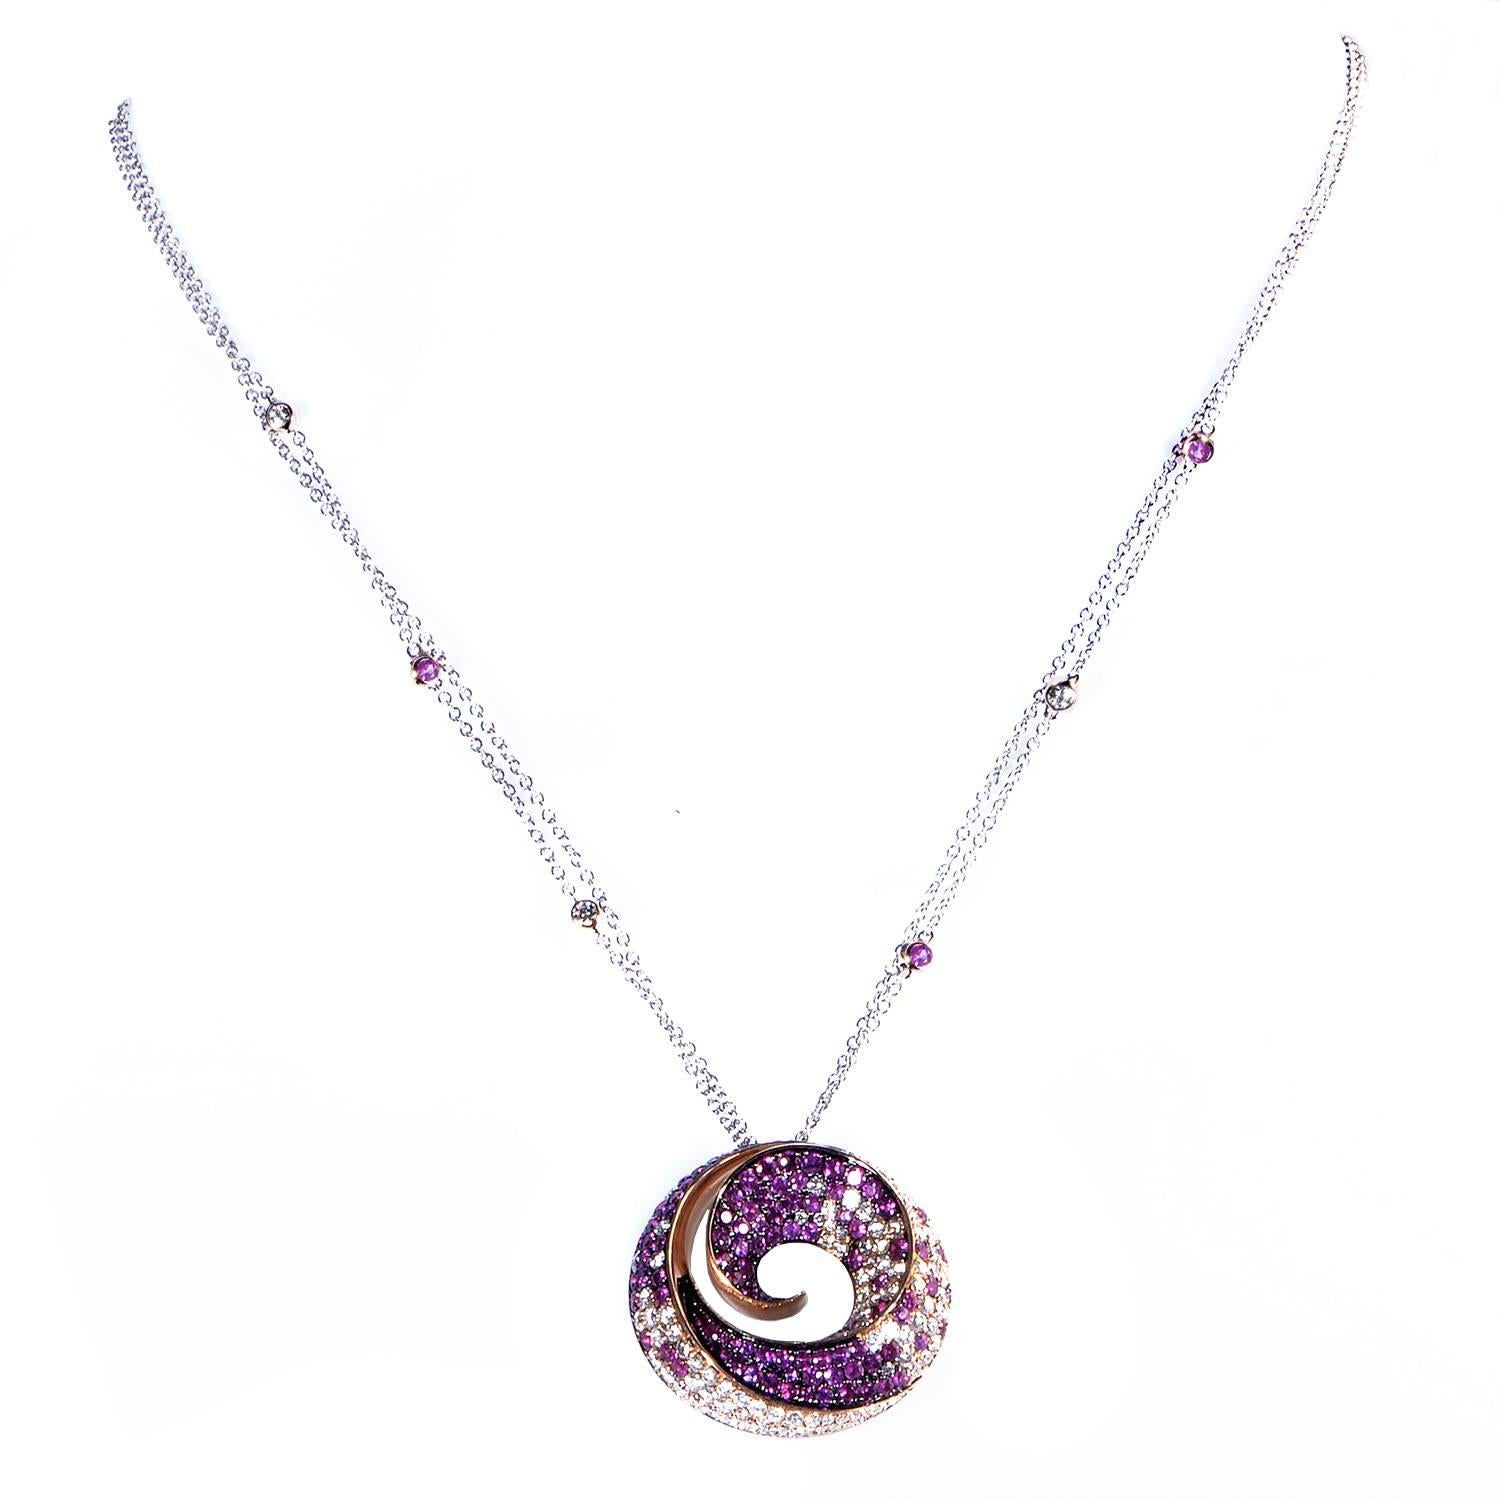 A magnificent item of dazzling beauty, this fascinating necklace from Miori is made of 18K rose and white gold and boasts a spellbinding pendant embellished with a majestic blend of glistening diamonds totaling 2.48 carats and feminine pink